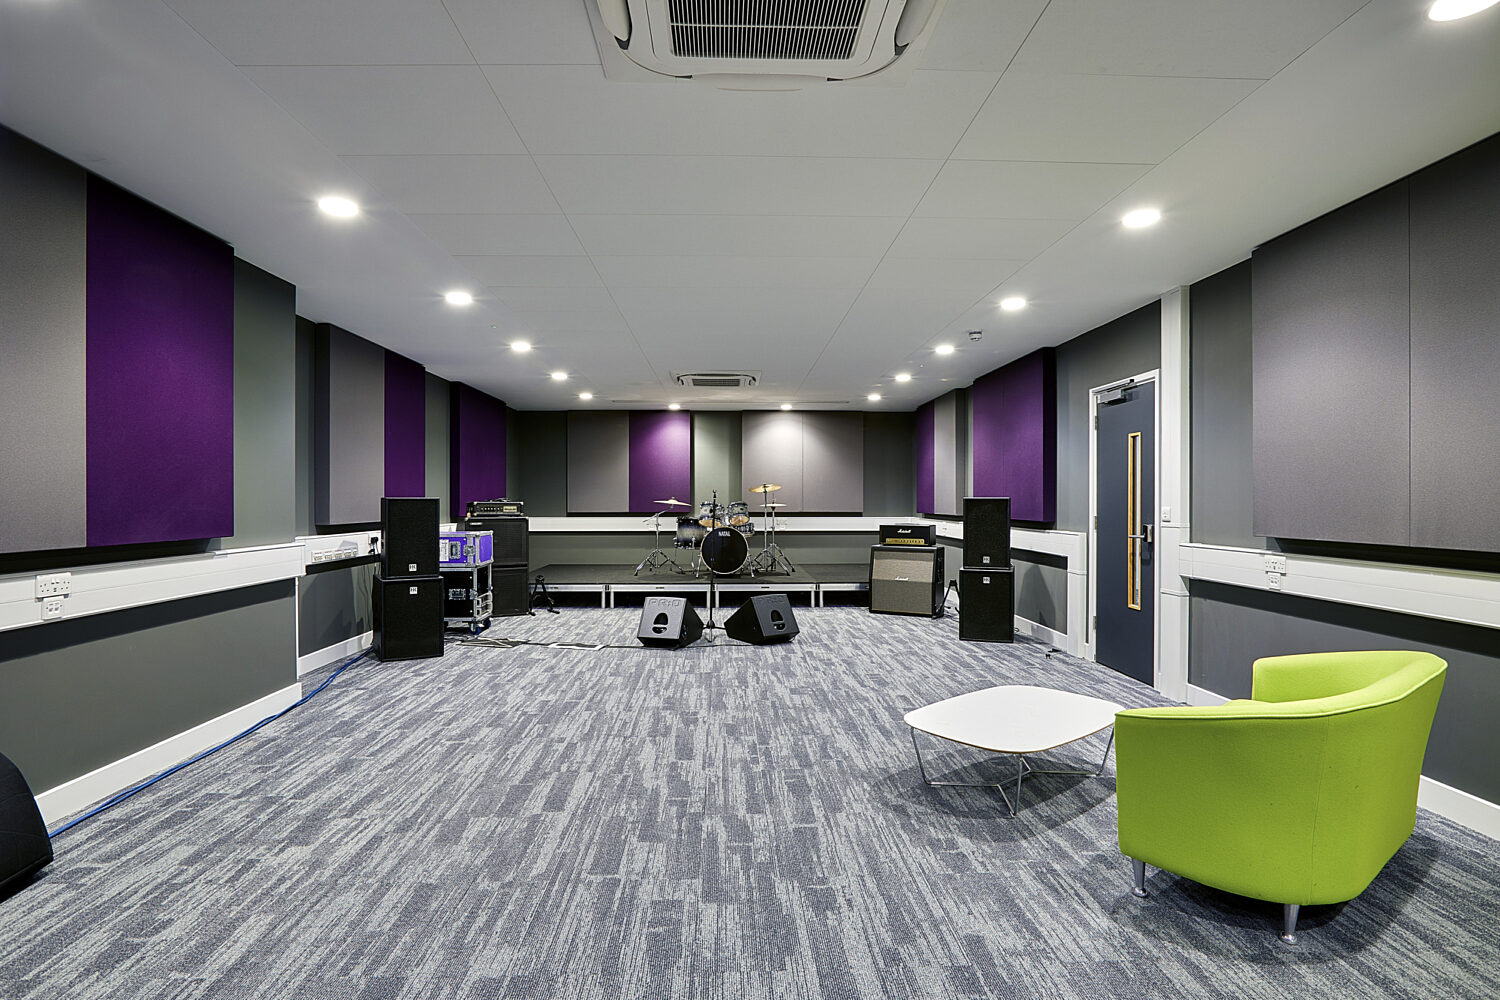 Sound proof room that are acoustically enhanced